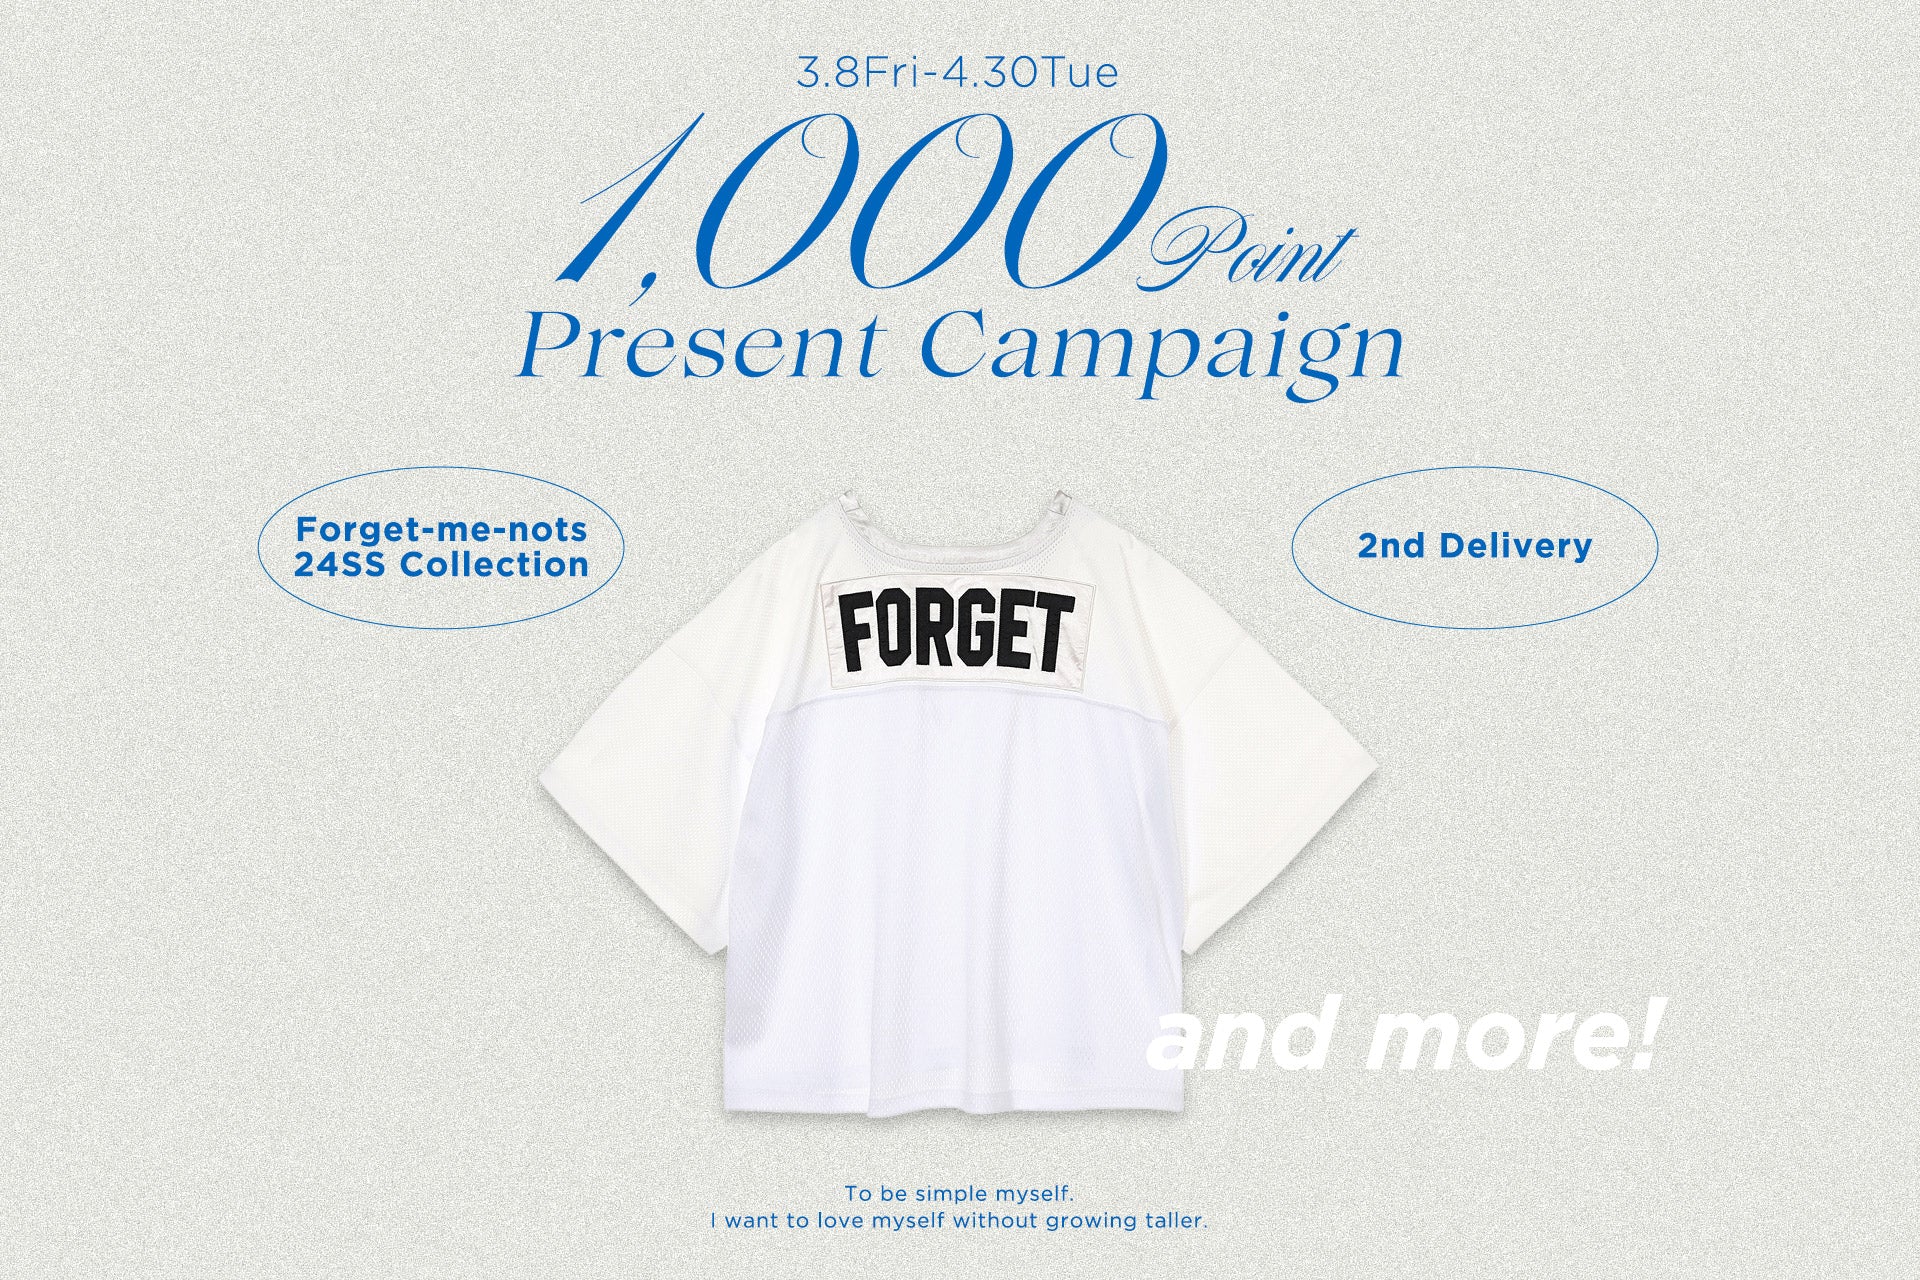 Forget-me-nots 24SSアイテム購入で1000ポイントプレゼント！｜スニーカー・ファッションのForget-me-nots